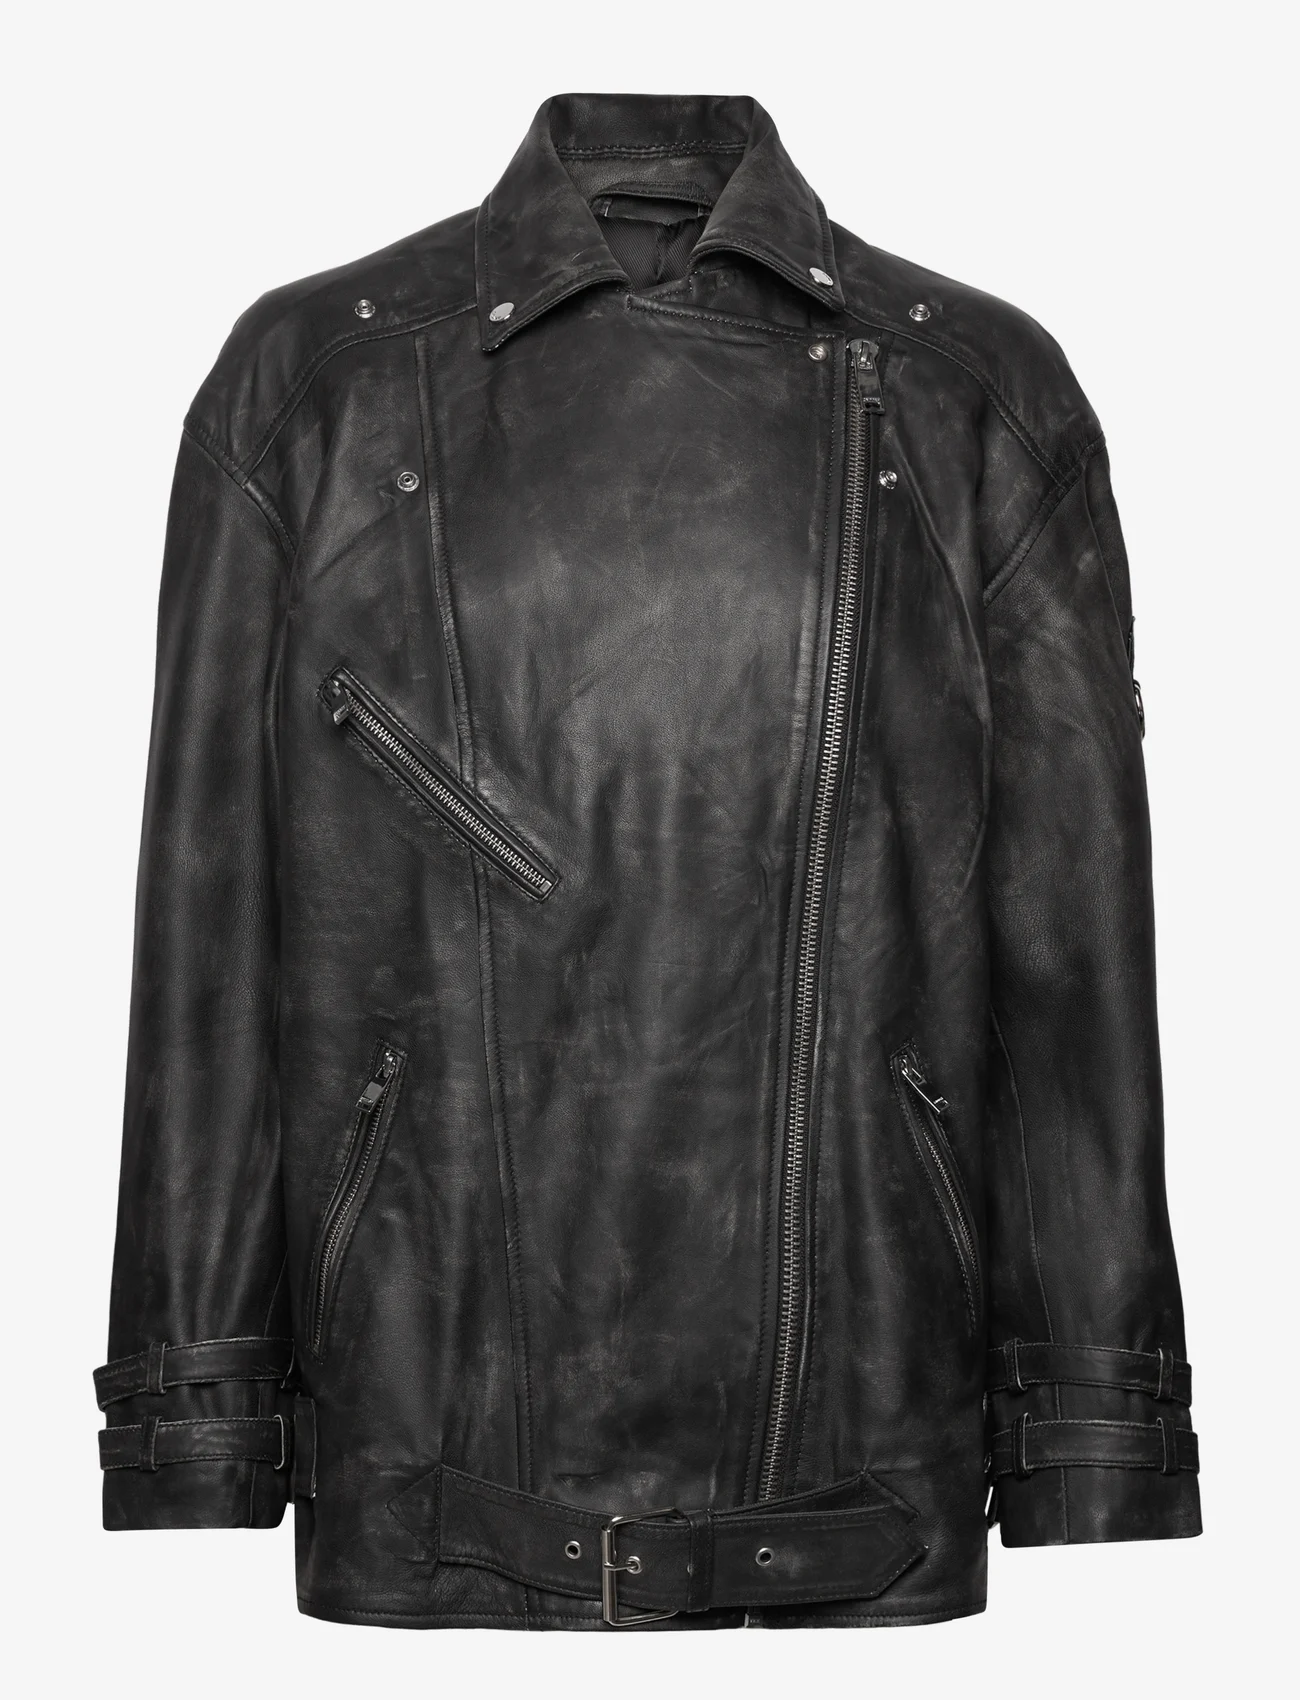 2NDDAY - 2ND Jagger - Uneven Leather - spring jackets - unblack - 0